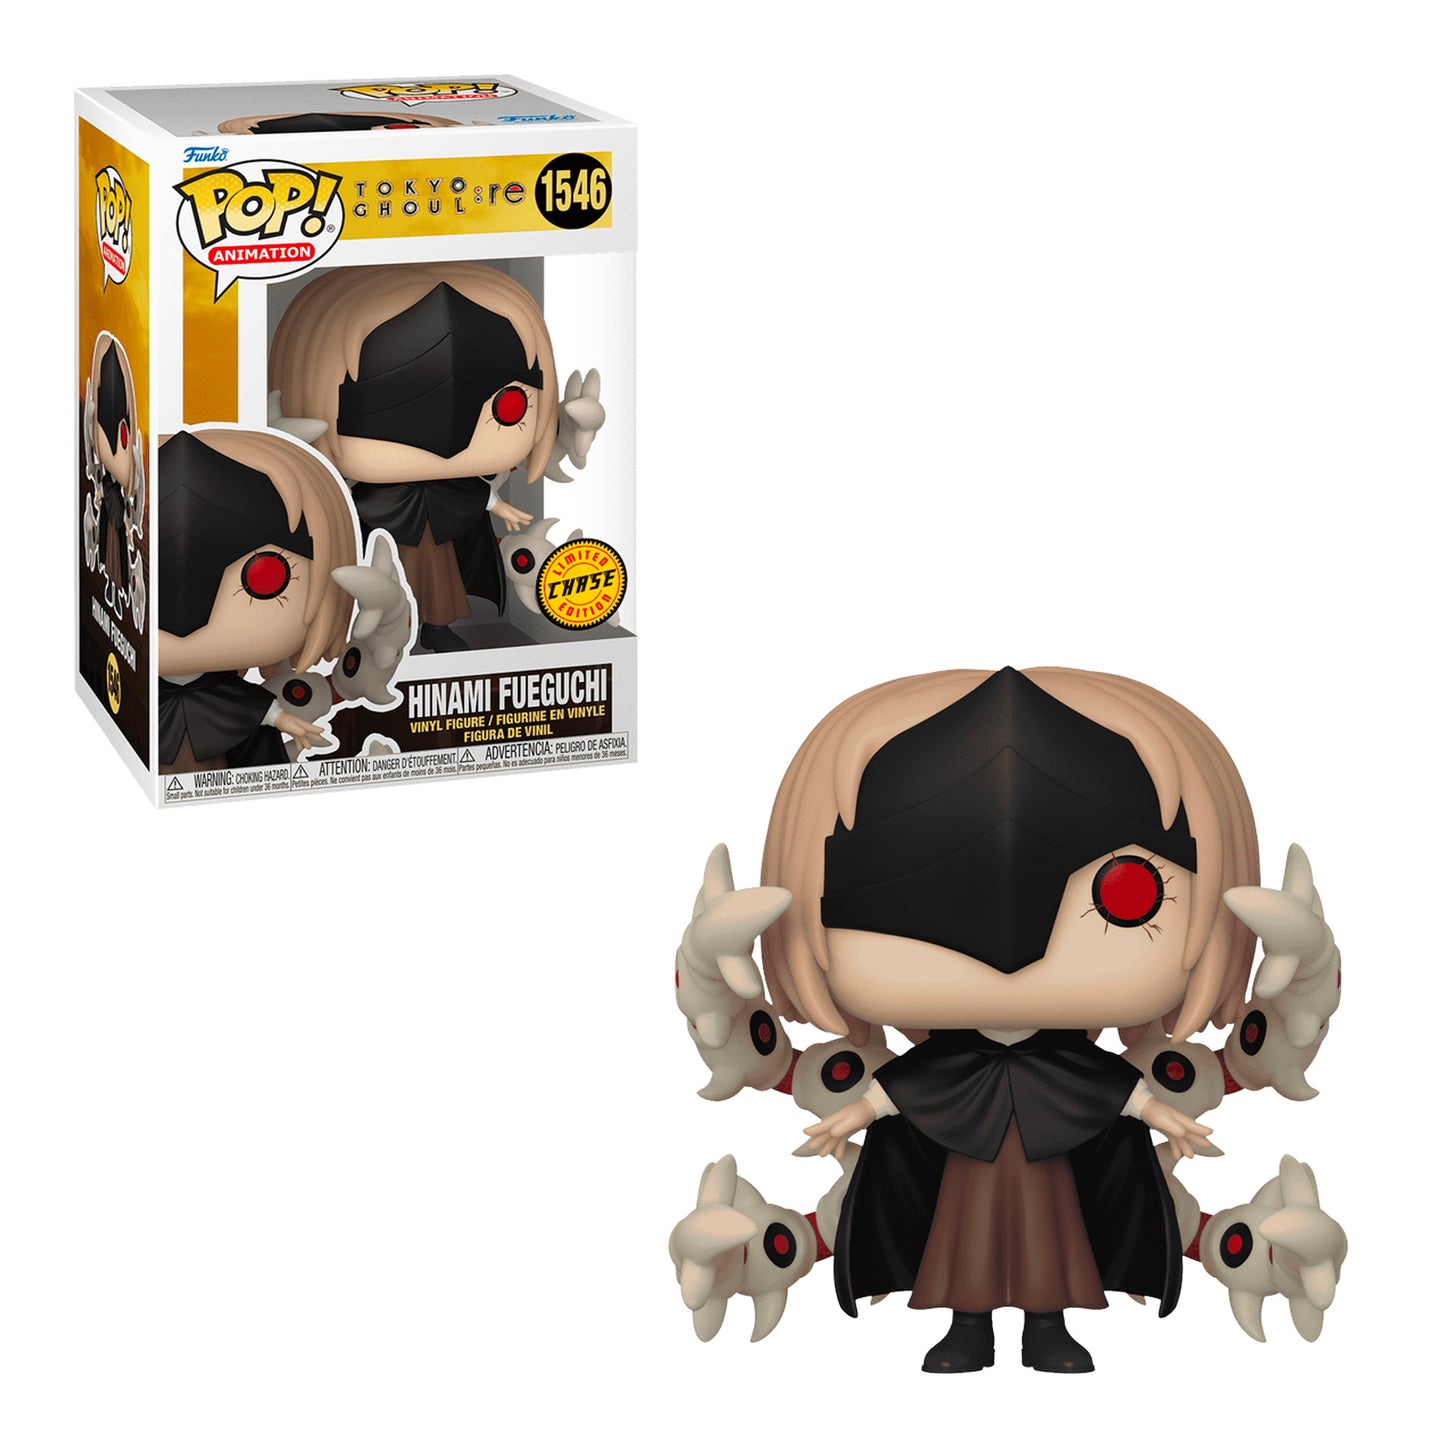 Funko Pop! Animation: Tokyo Ghoul - Hinami Fueguchi #1546 (1 in 6 Chance at Chase)